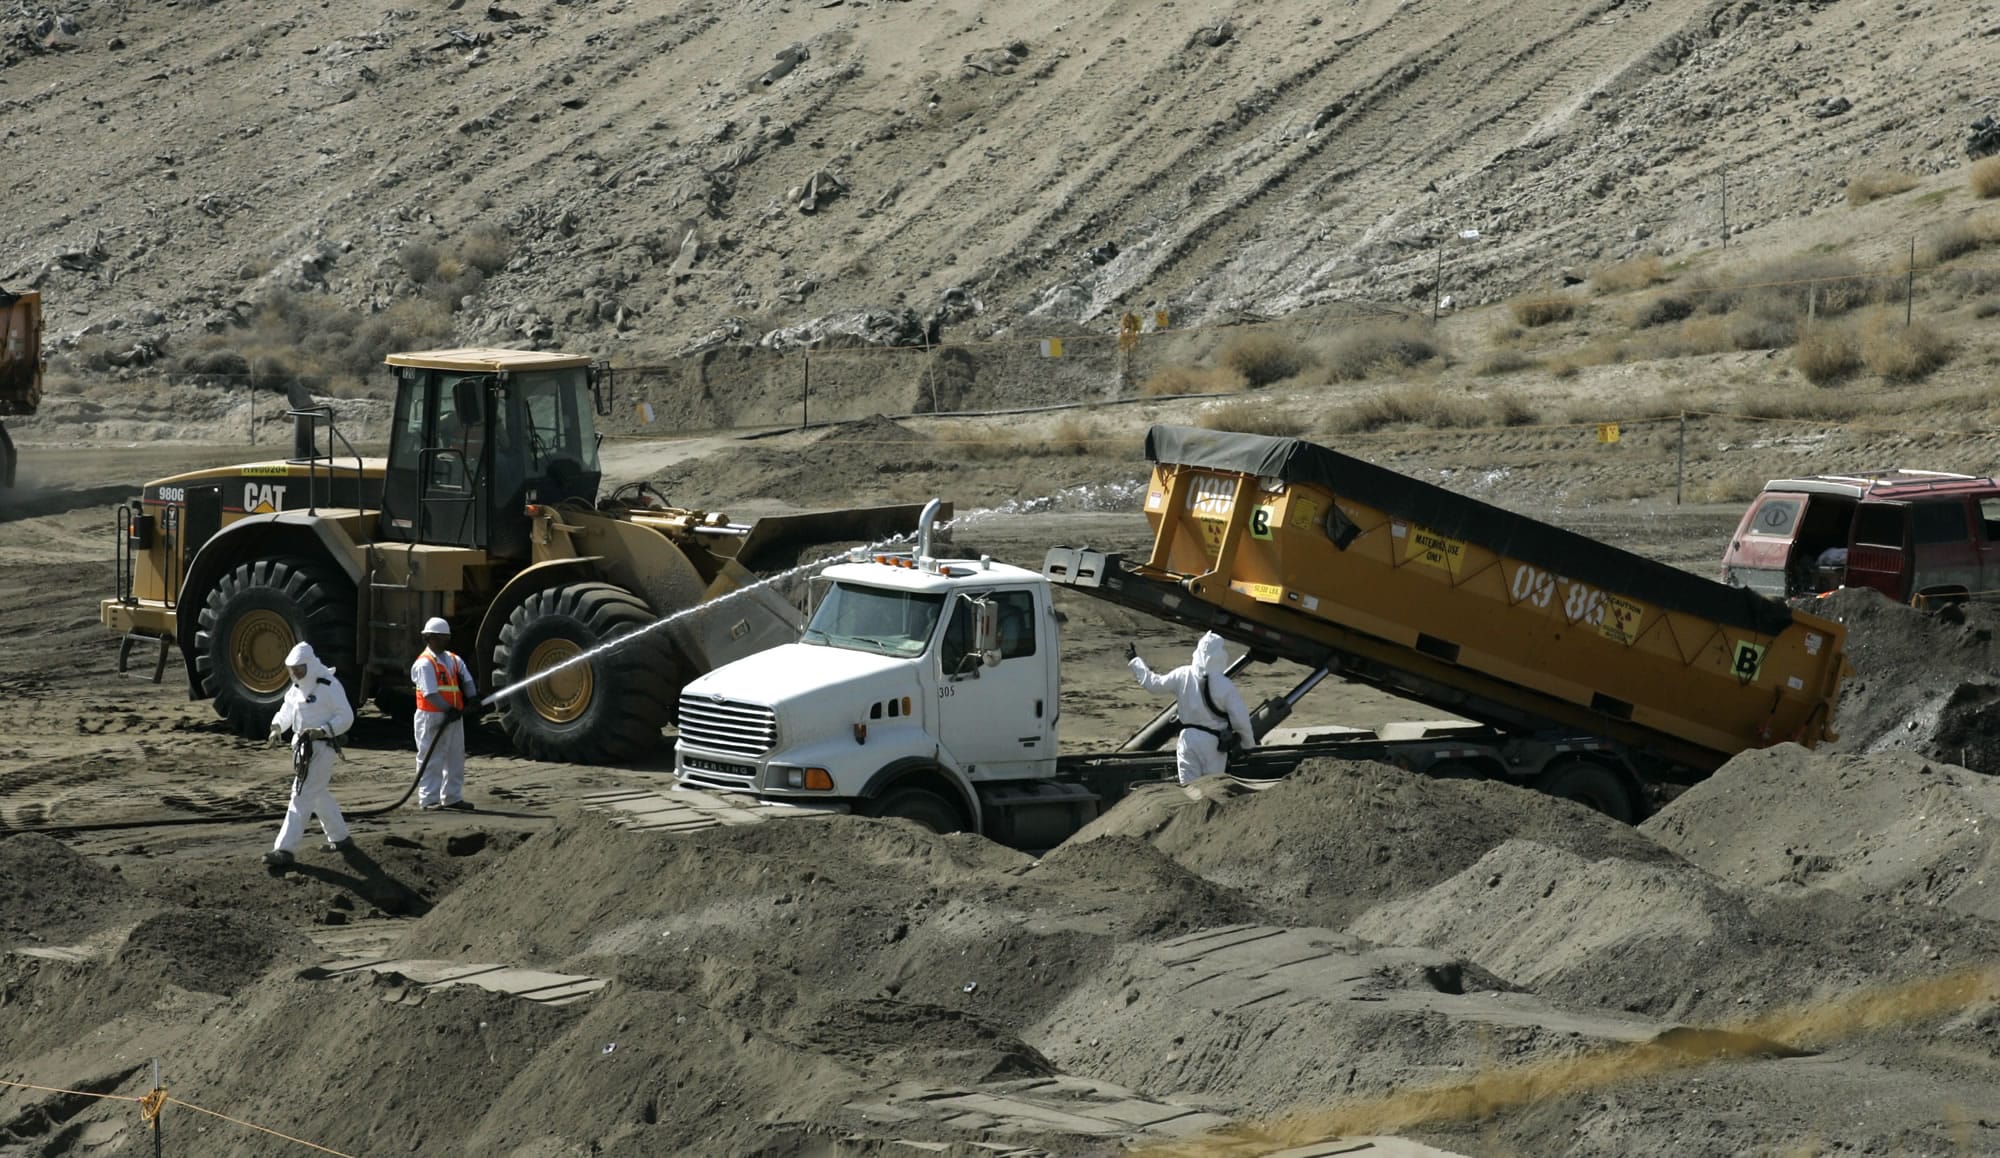 Workers wearing protective suits bury contaminated debris in a landfill on the Hanford nuclear reservation near Richland in 2008.